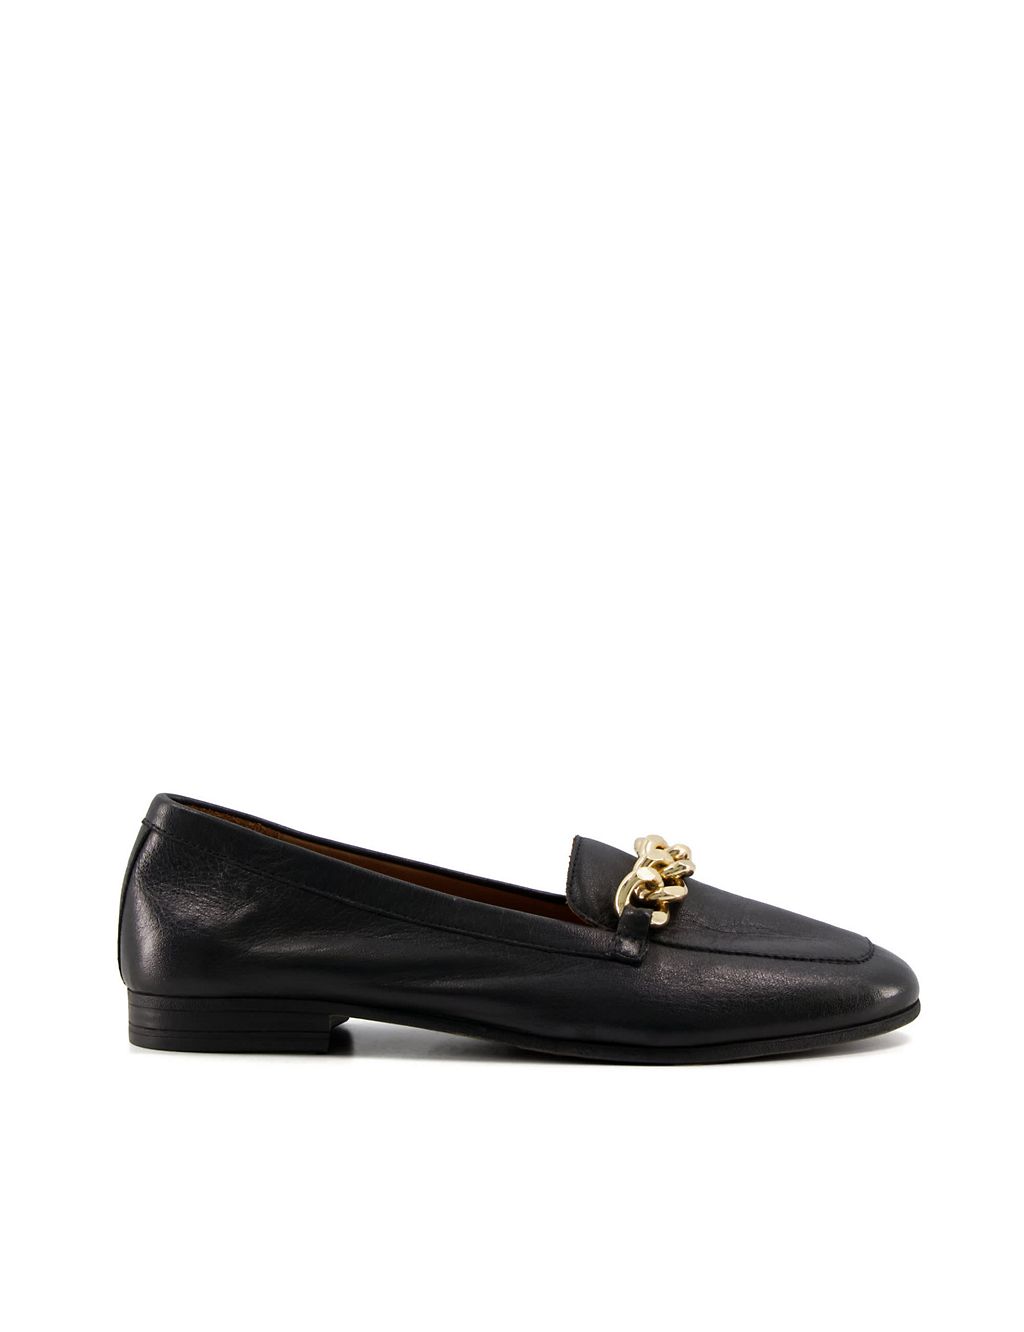 Leather Chain Detail Flat Loafers | Dune London | M&S